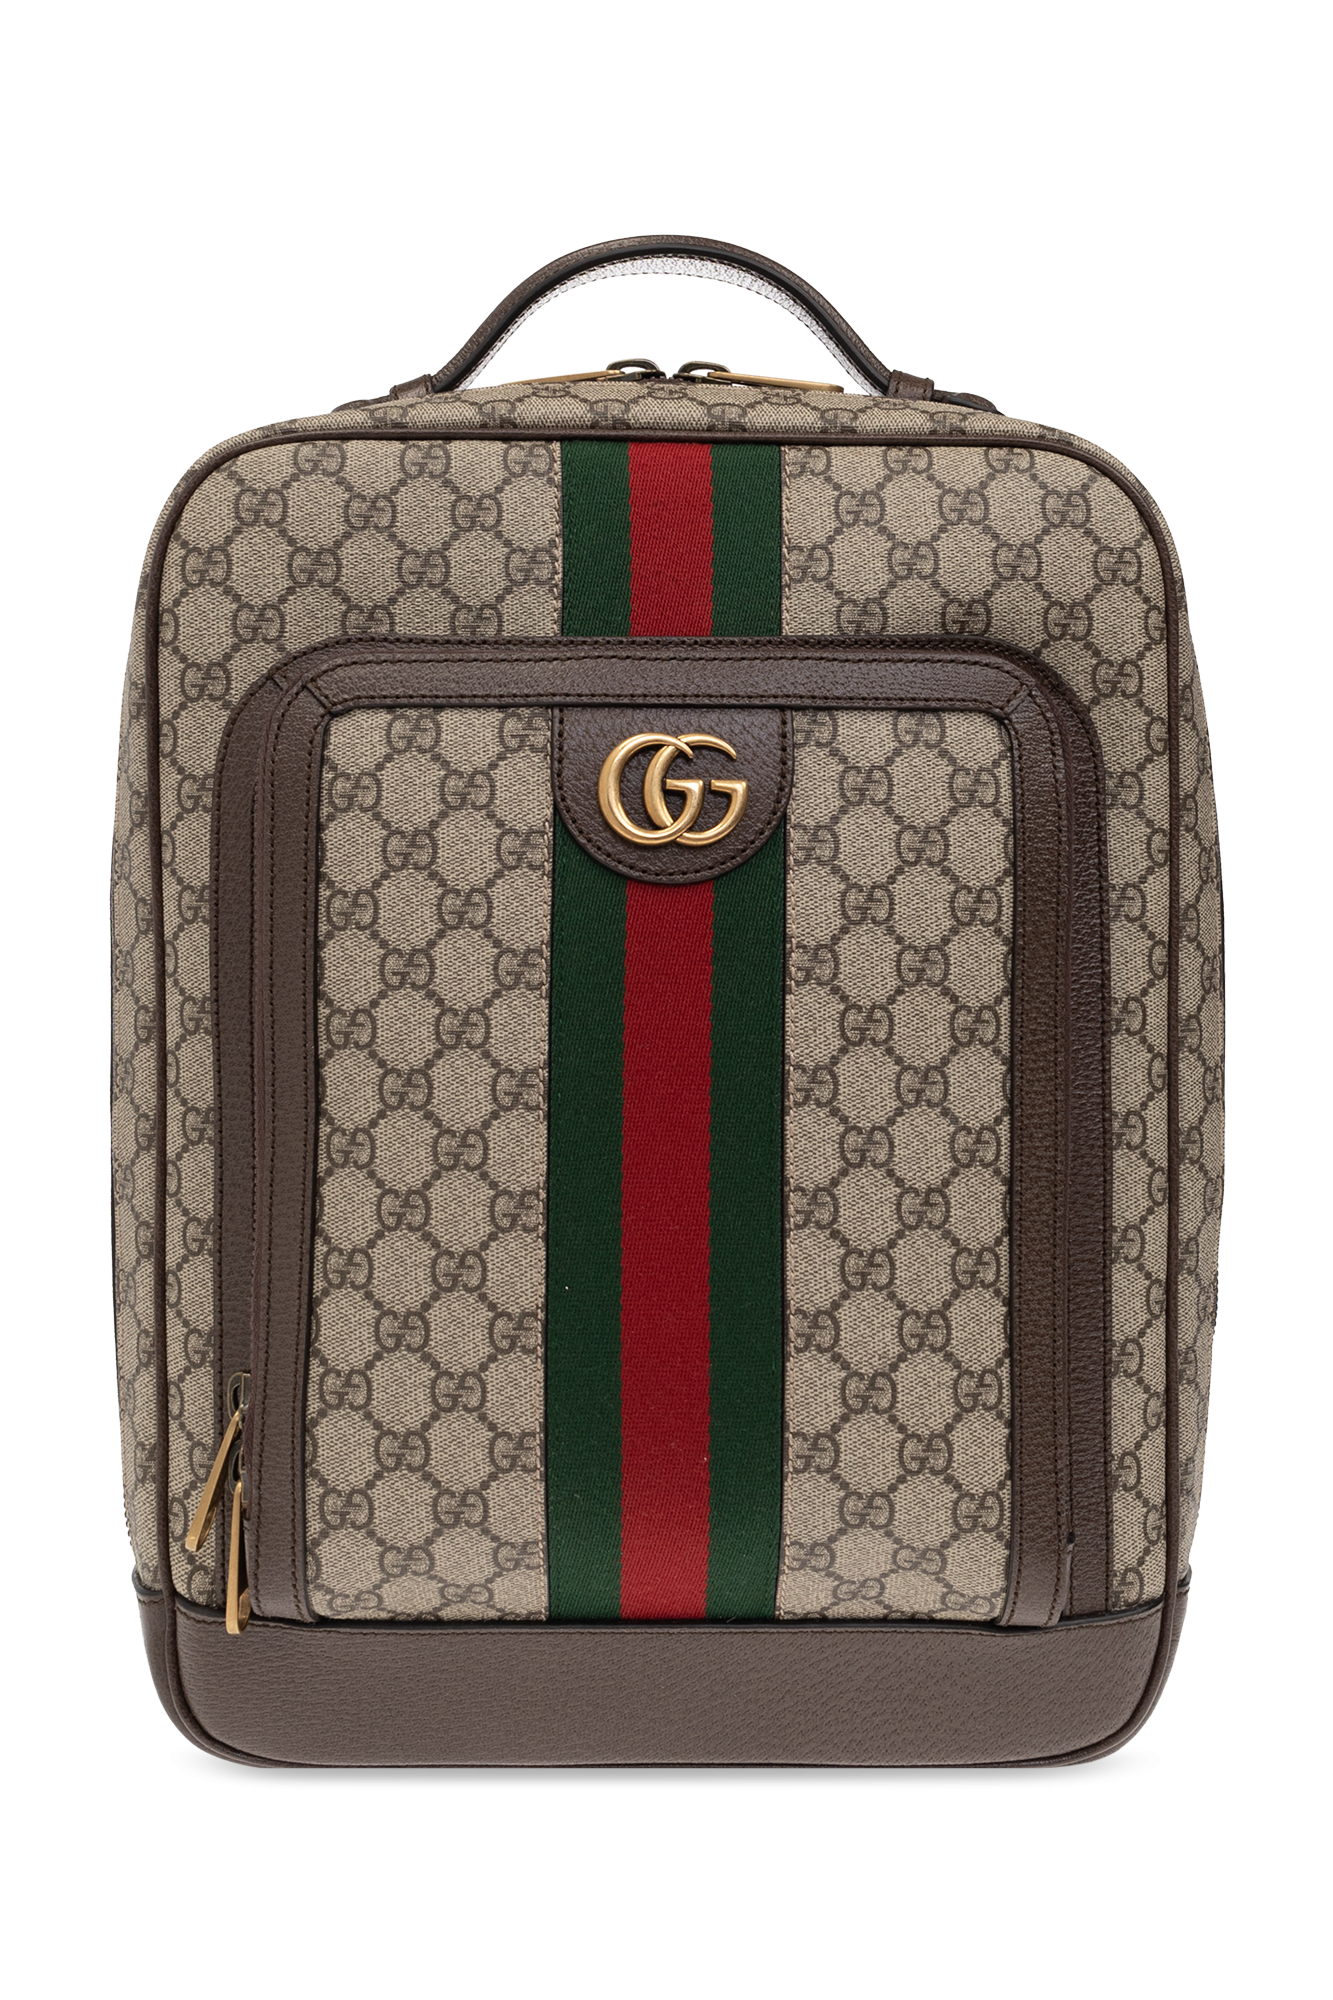 Free transparent gucci hat png images, page 1 